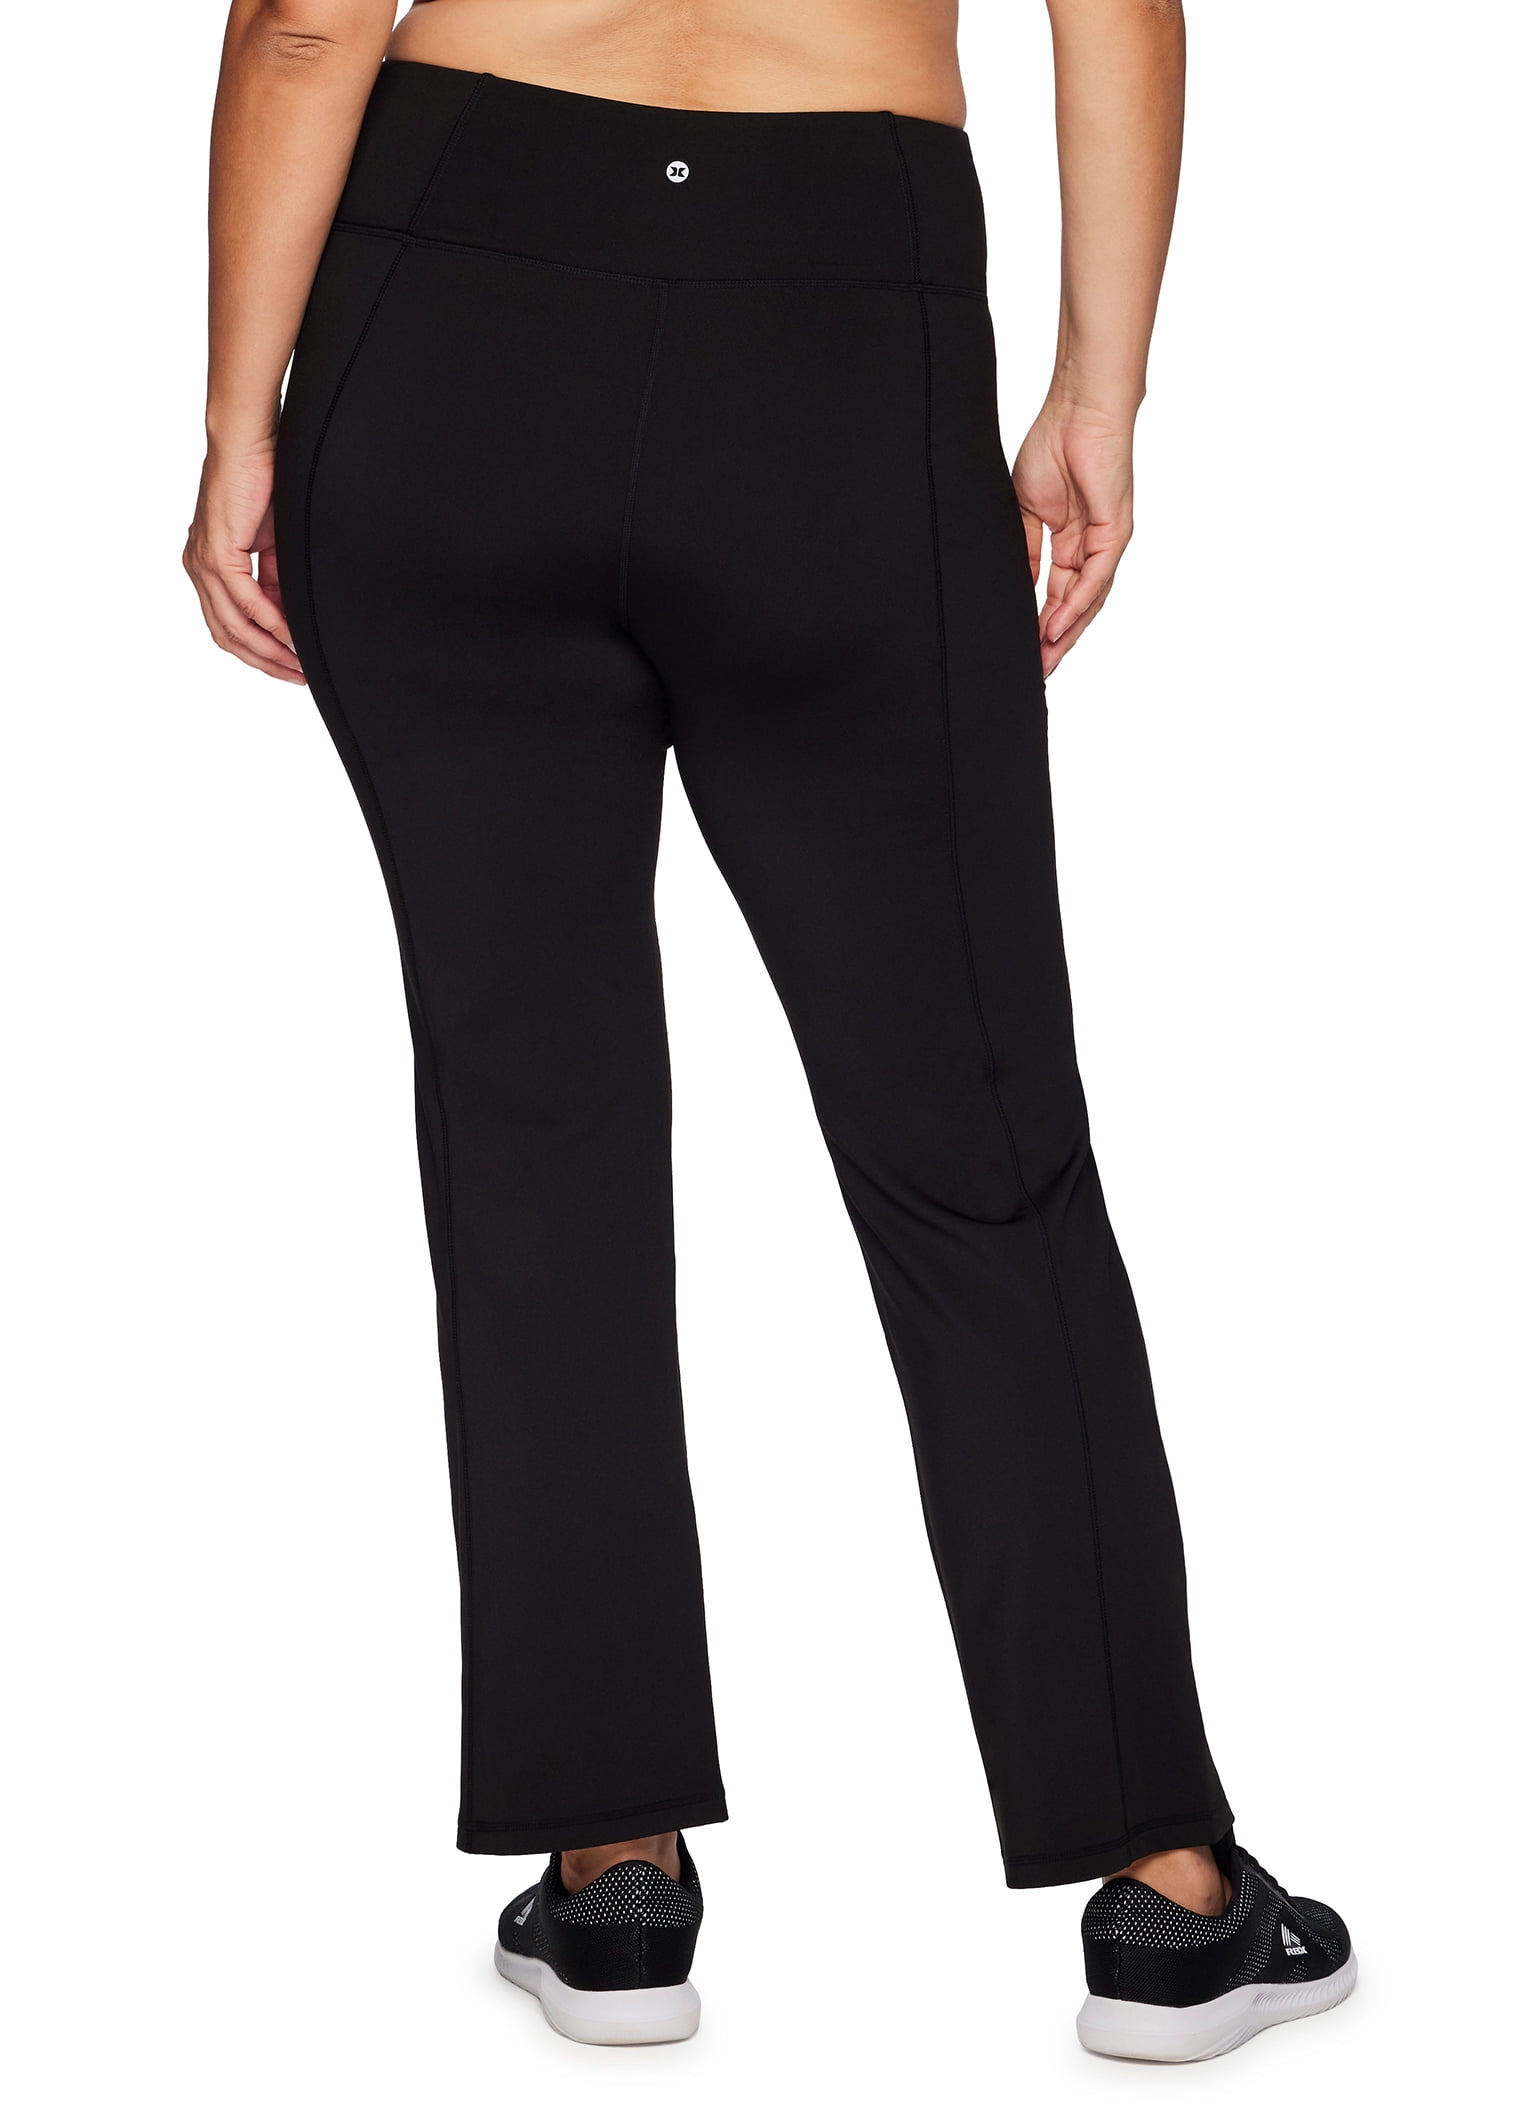 RBX Active Women's Plus Size Boot Cut Fleece Lined Yoga Pants with